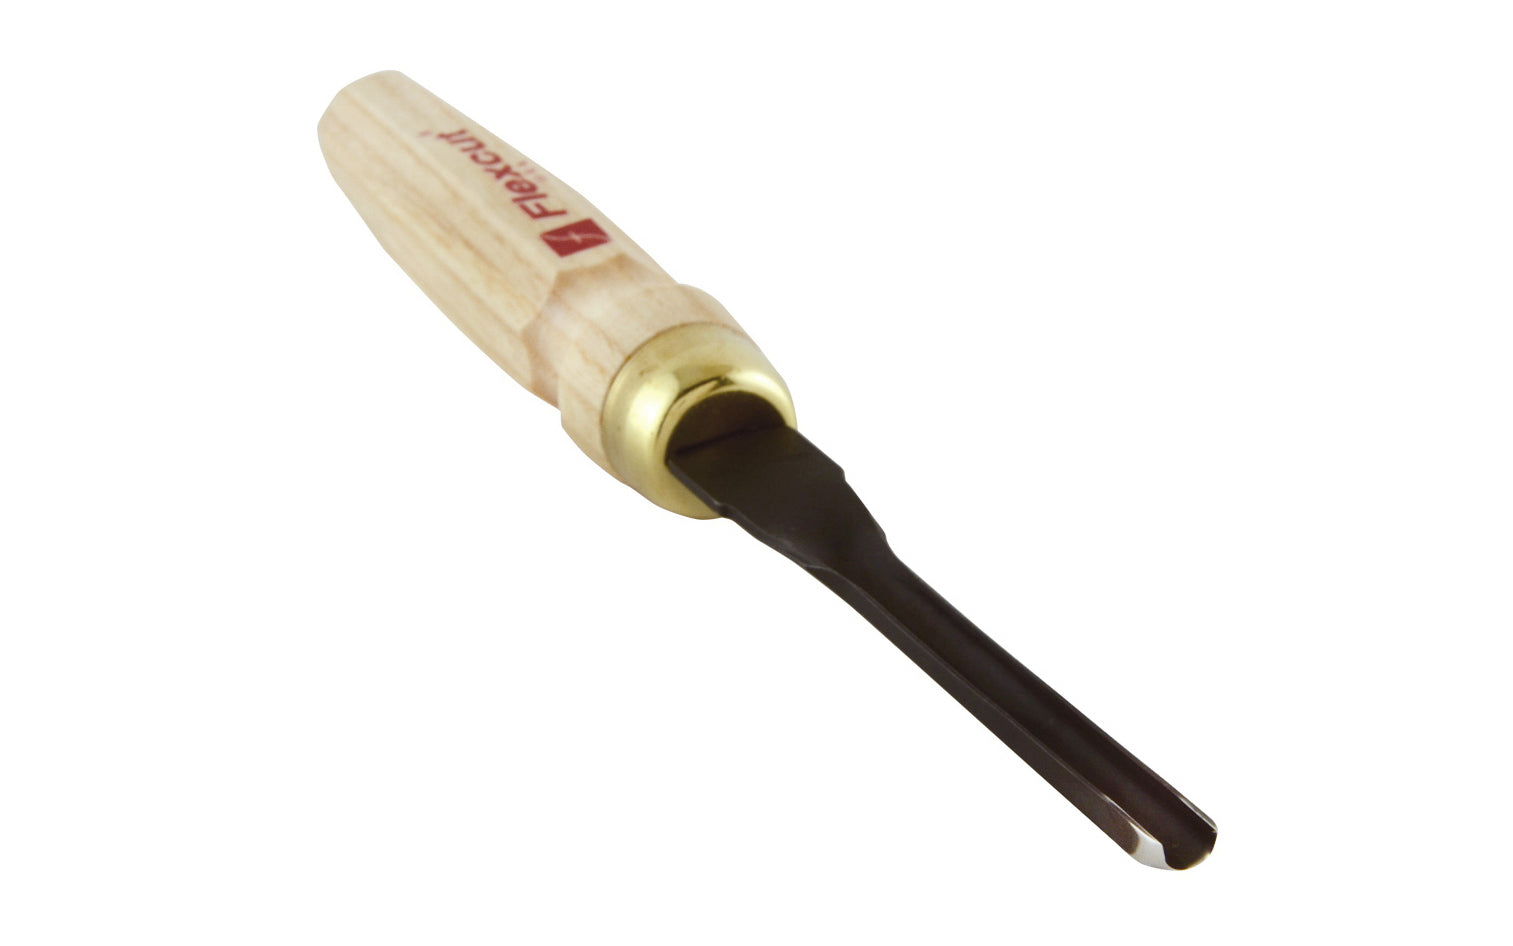 Made in USA • Model MC311 - High Carbon Steel Blade - Flexcut Mallet Carving Tool - Mallet Gouge - Carving Gouge - Sweep - regular curved gouge - Mallet gouge tool can be used by hand or struck with mallet - Sculpture mallet gouge - Hardwoods - No. 11 Sweep - #11 Sweep x 1/4" (6 mm) wide blade - 651646083119 - MLT tool - MLT Mallet Gouge -  MLT tool - MLT Mallet Gouge